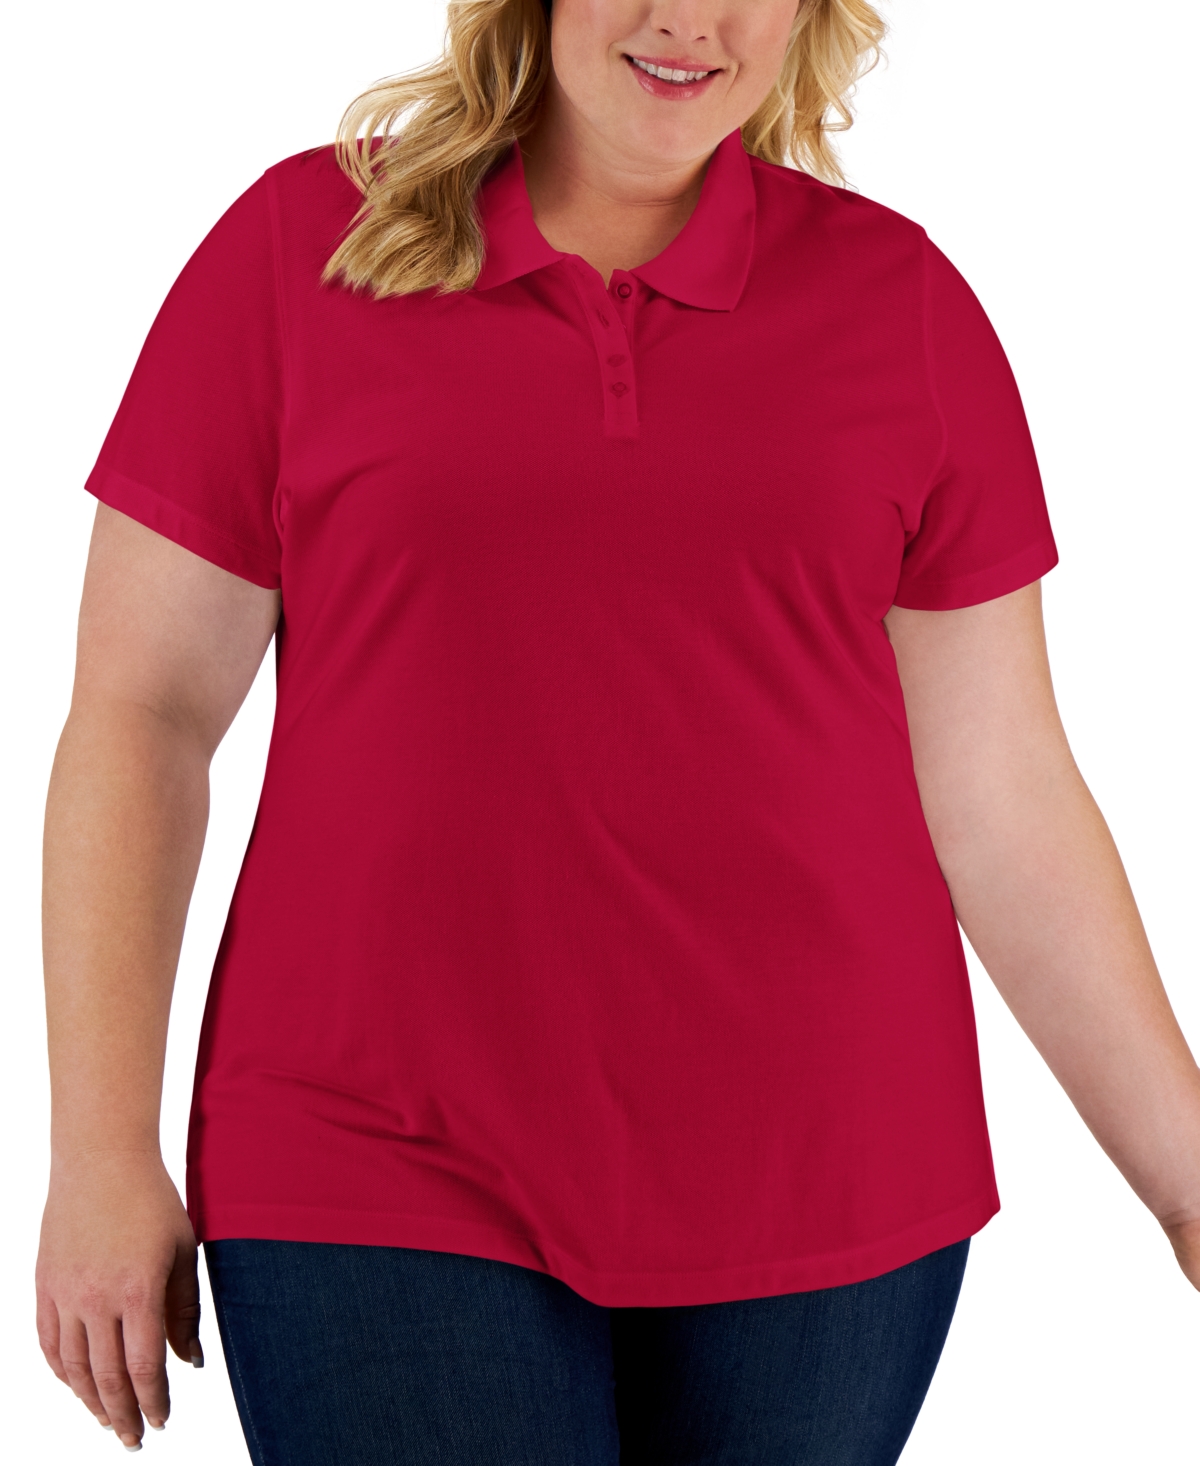 Plus Size Cotton Short-Sleeve Polo Shirt, Created for Macy's - New Red Amore